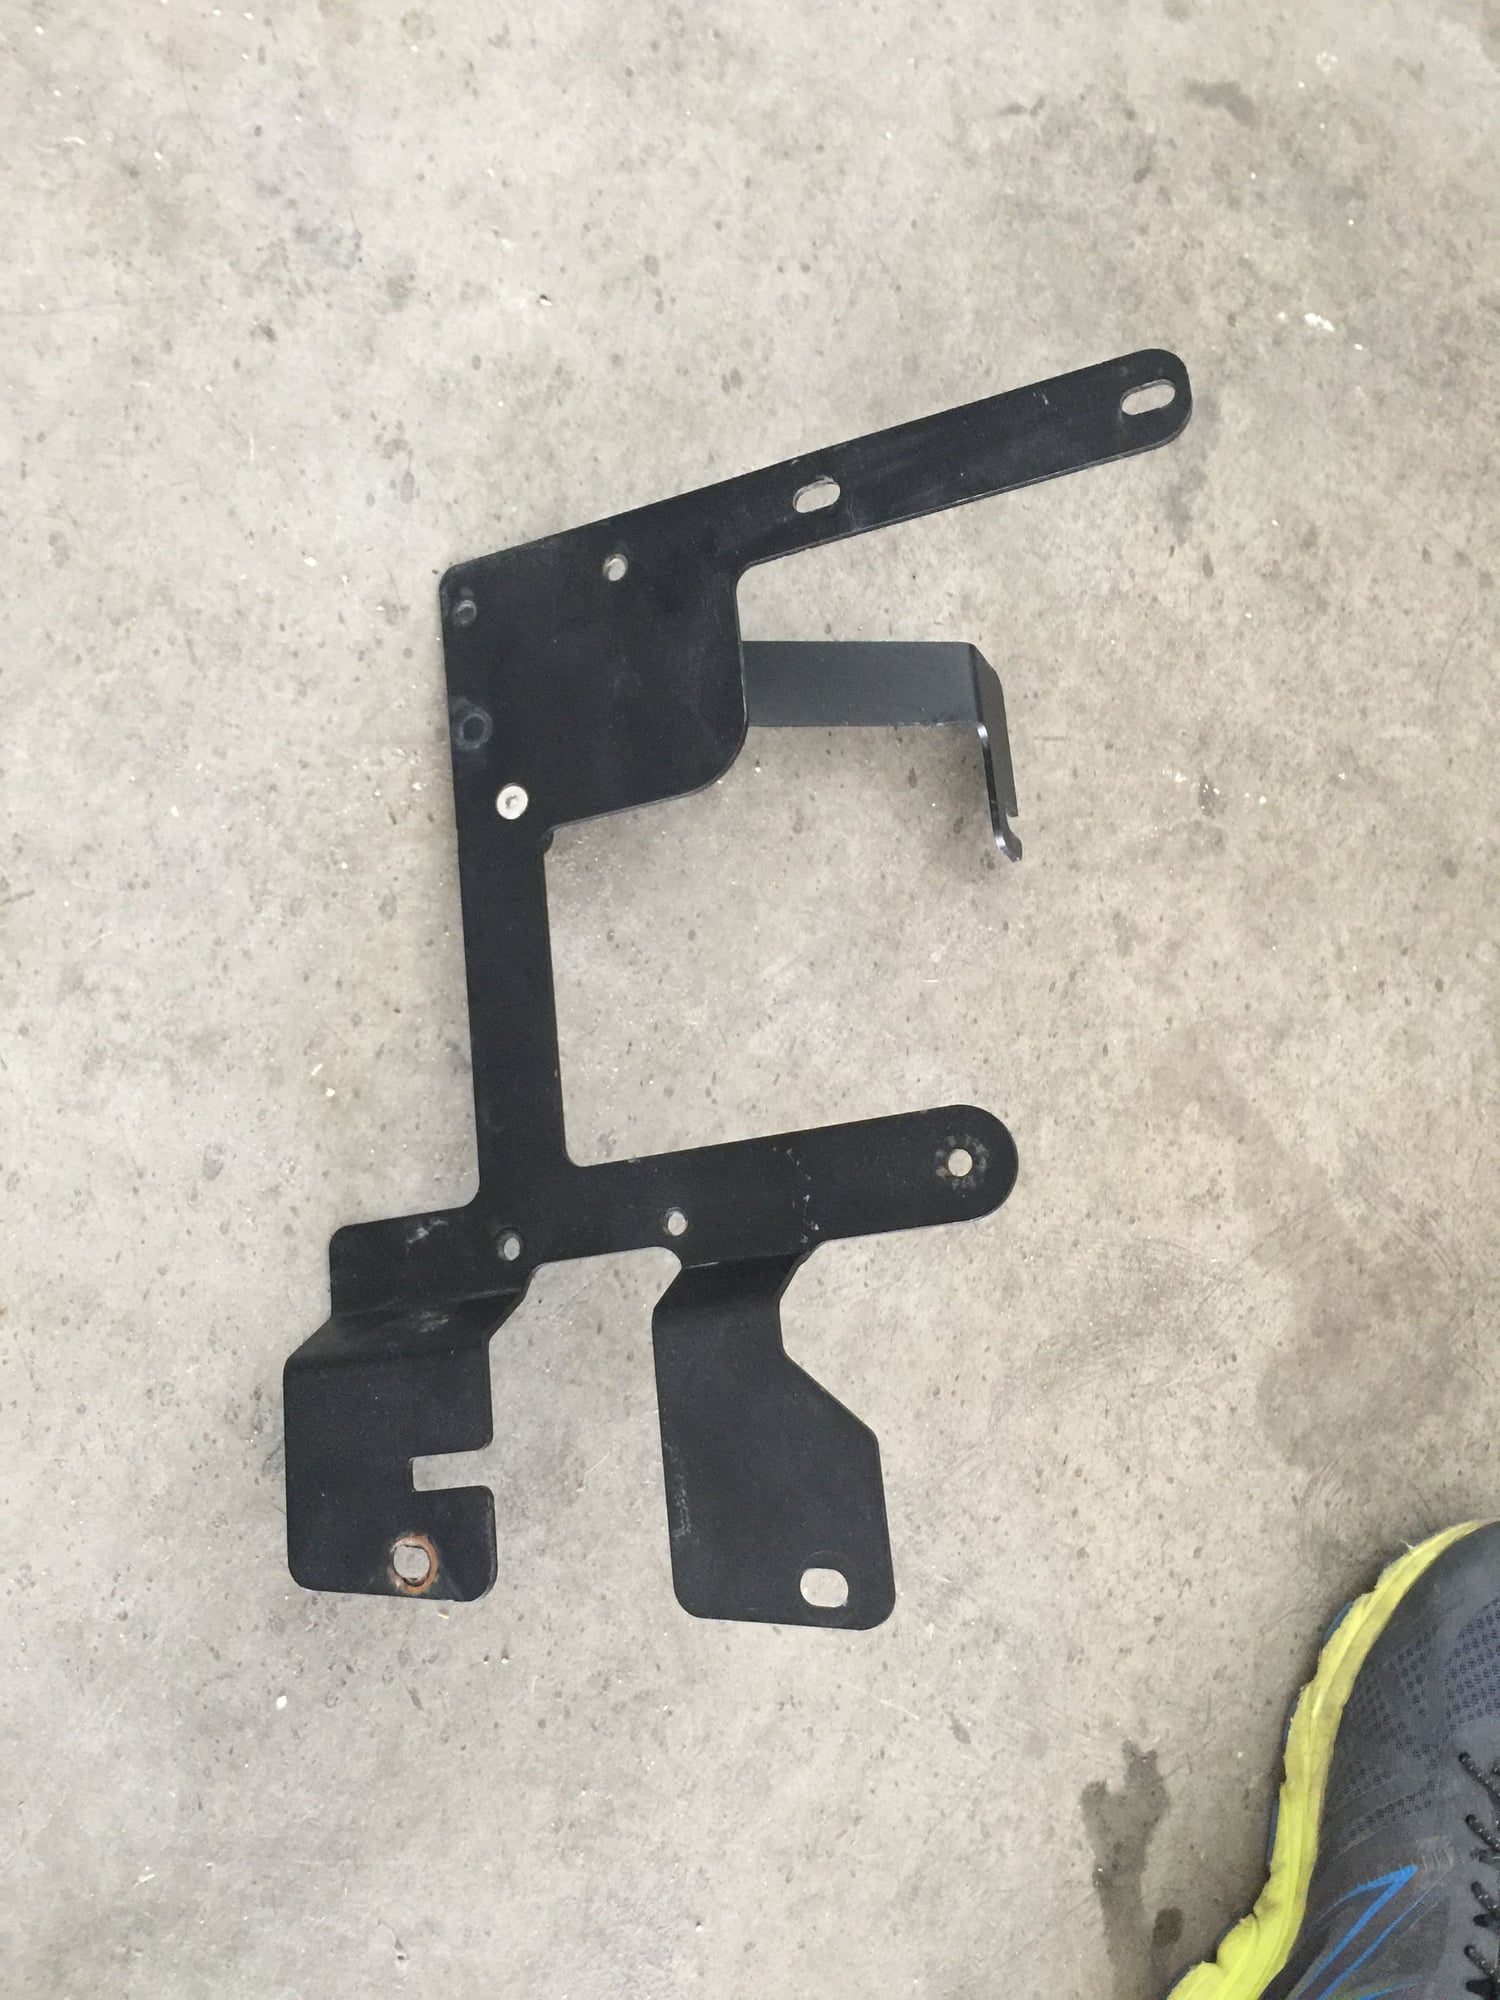 Accessories - ARB Twin Compressor Underhood Mount - Used - 2007 to 2018 Jeep Wrangler - Lake Forest, CA 92630, United States